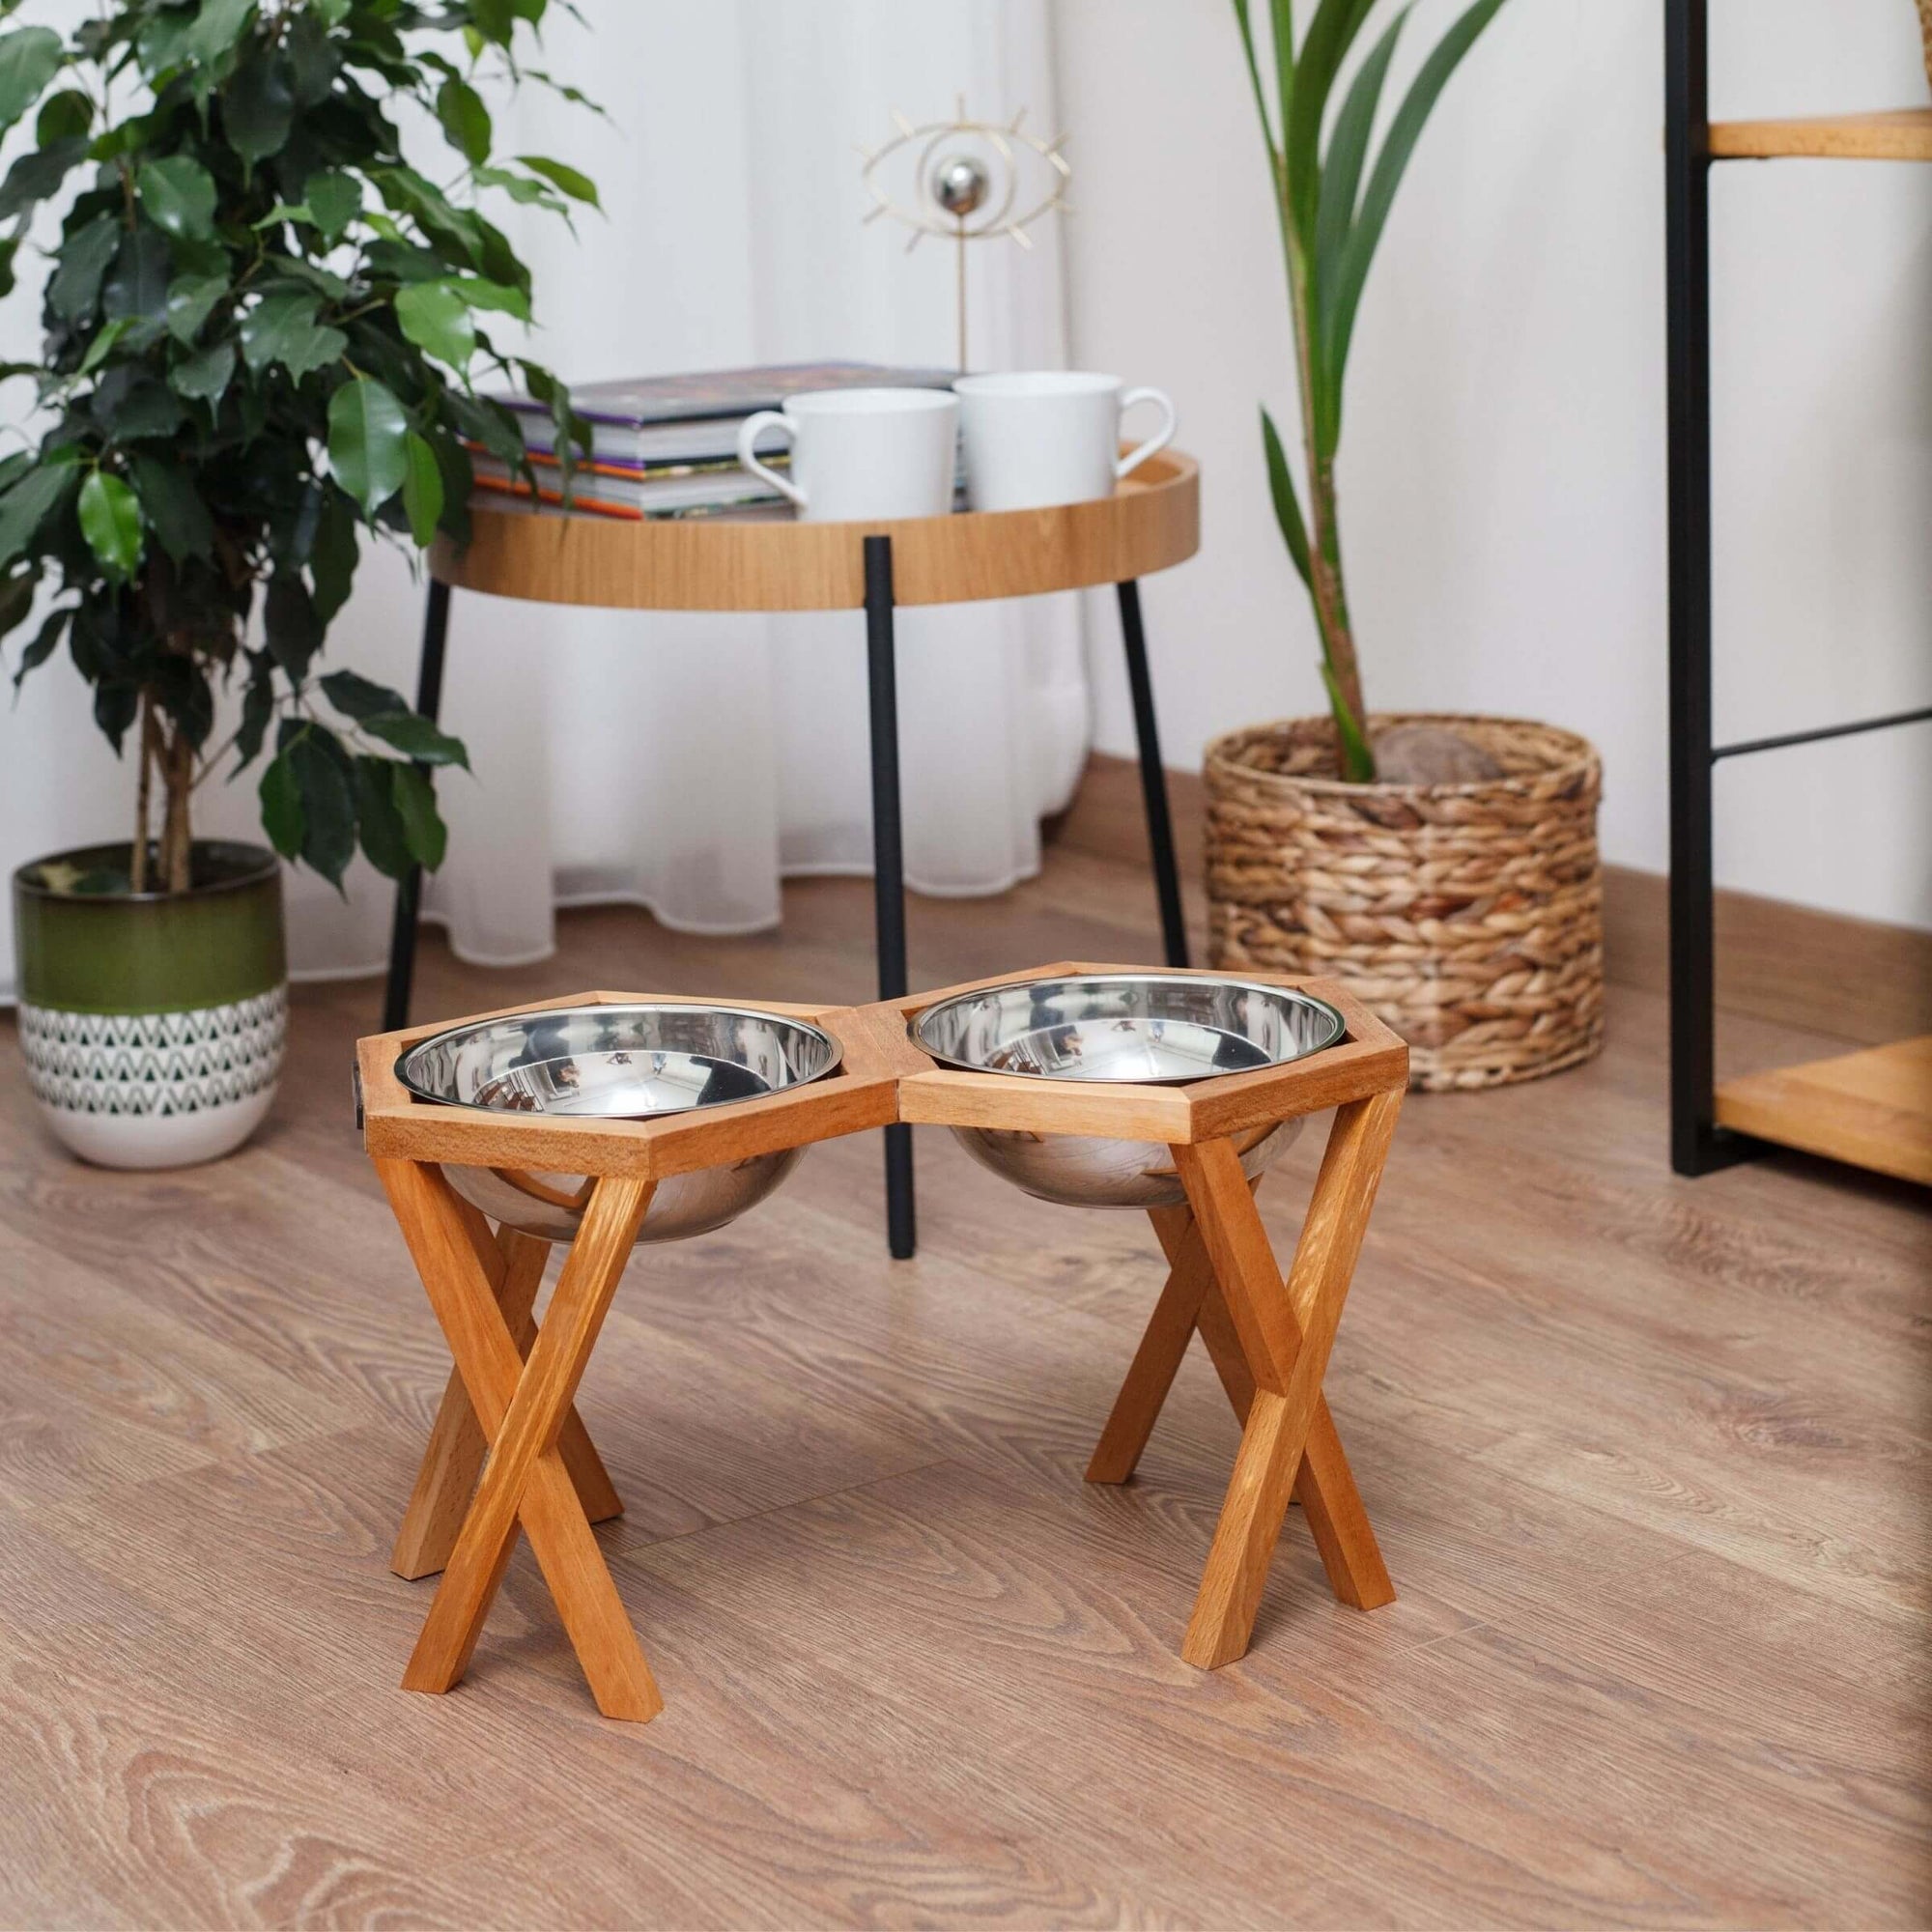 Raise your dog's experience with new wooden elevated dog bowls